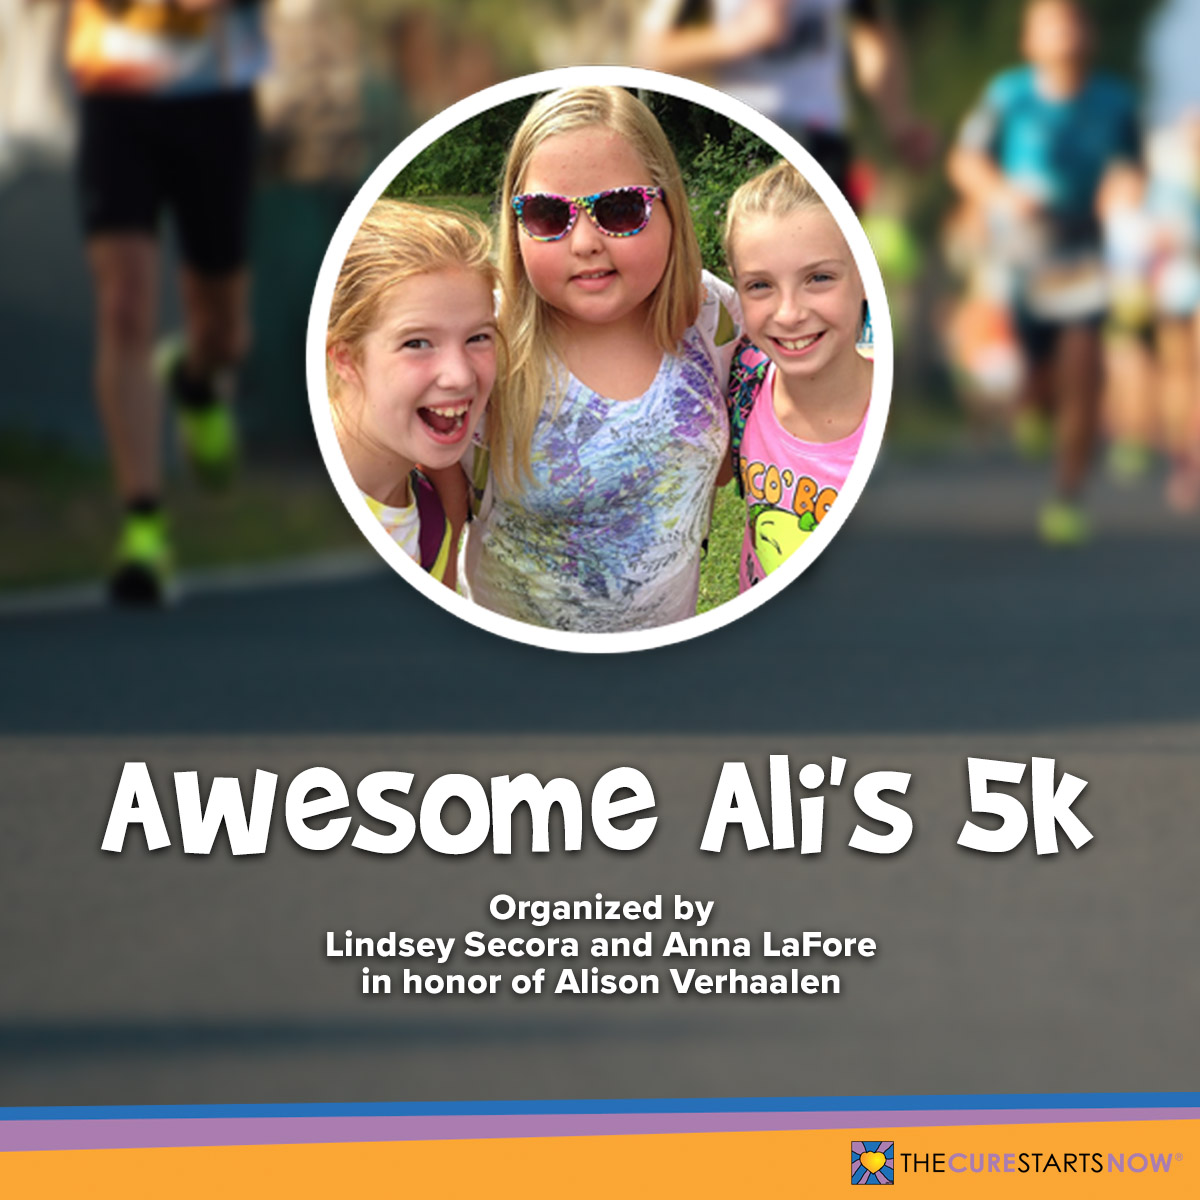 Awesome Ali's 5k